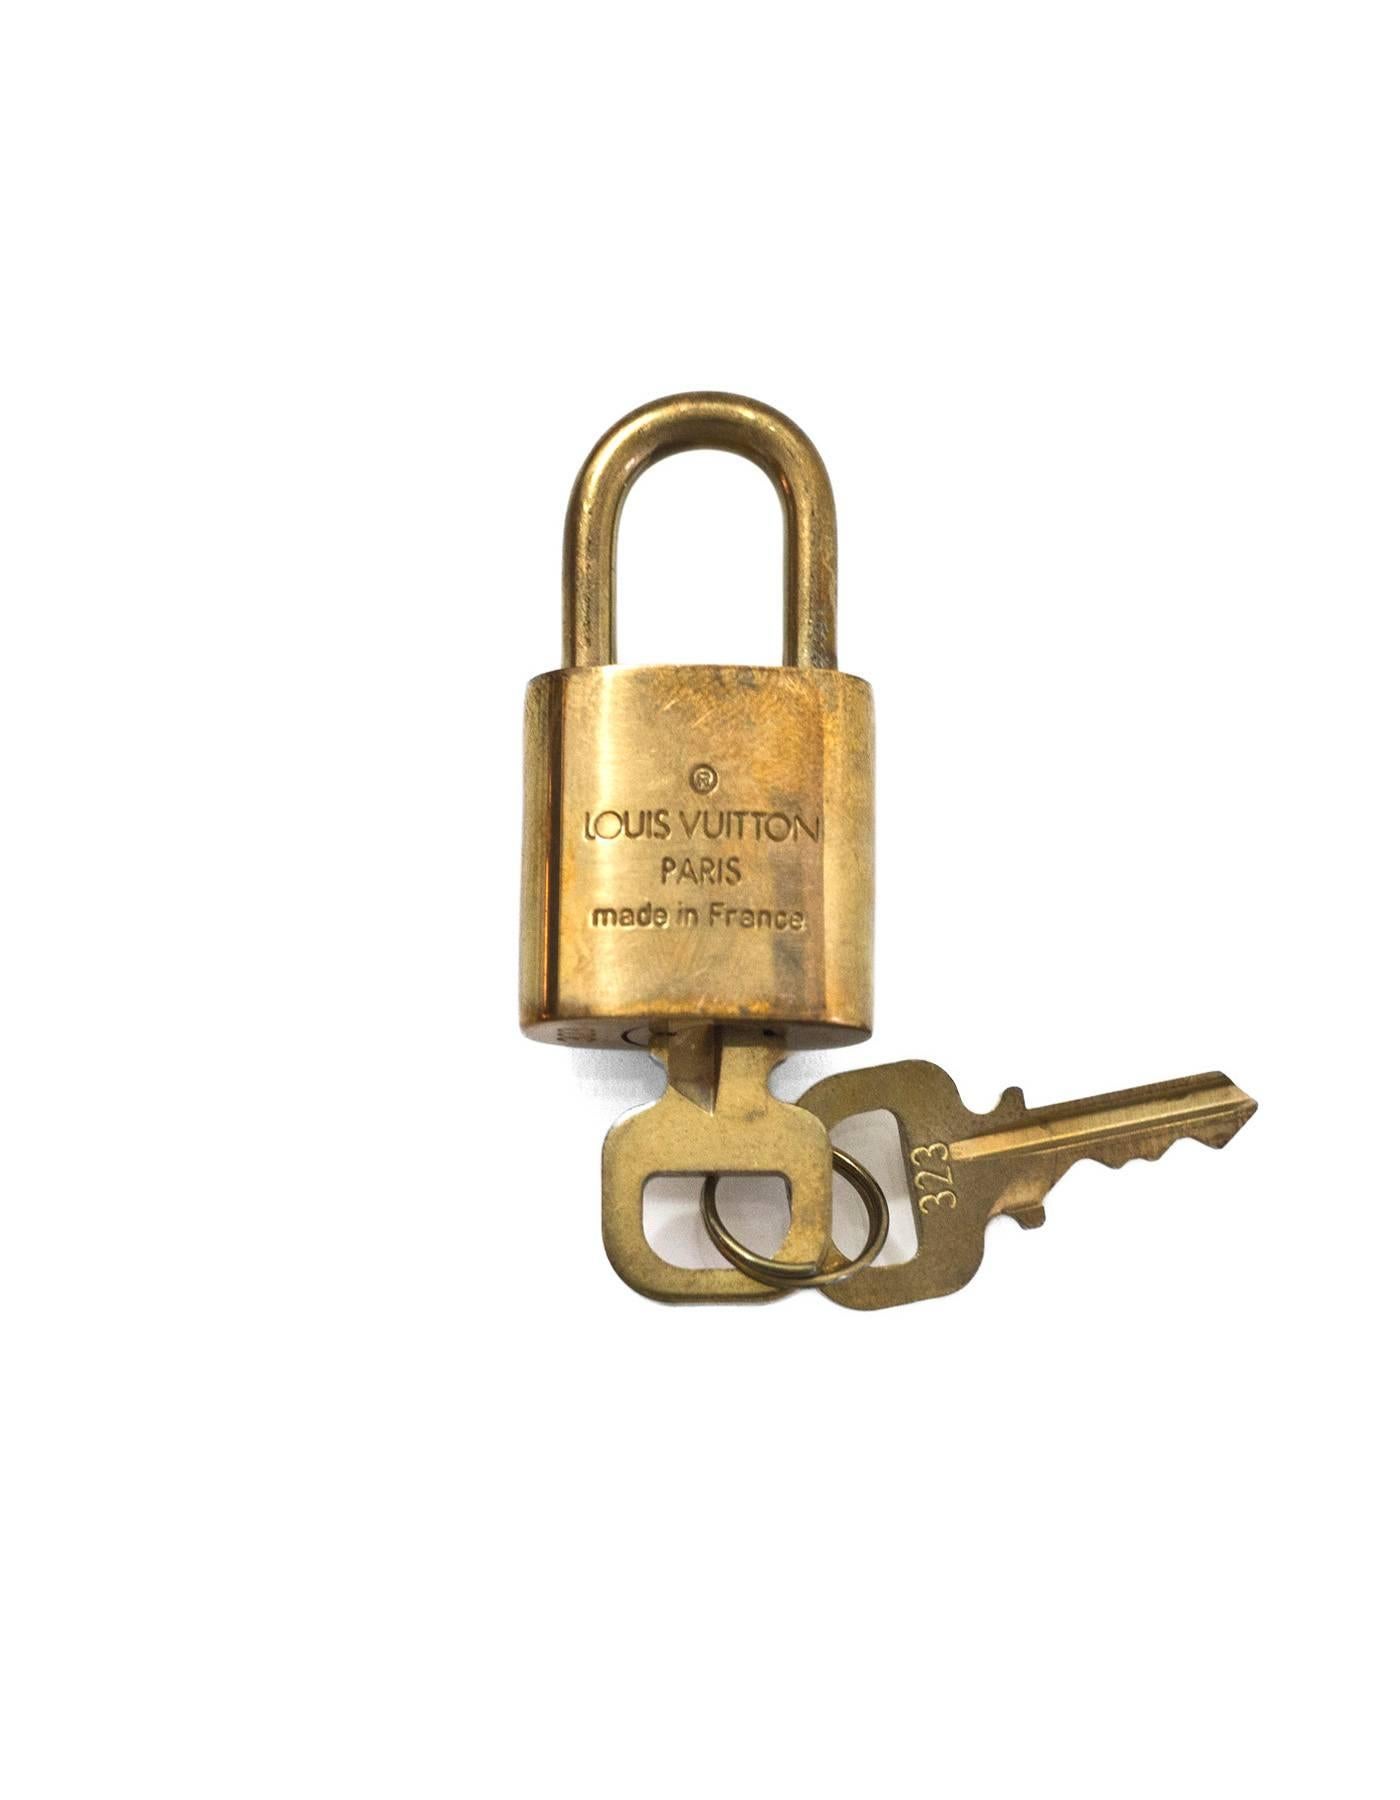 Louis Vuitton Goldtone Lock & Keys

Made In: France
Color: Gold
Hardware: Goldtone
Materials: Metal
Stamp: Louis Vuiton Made in France 323
Overall Condition: Very good good pre-owned condition, light tarnish throughout
Includes: Lock, two